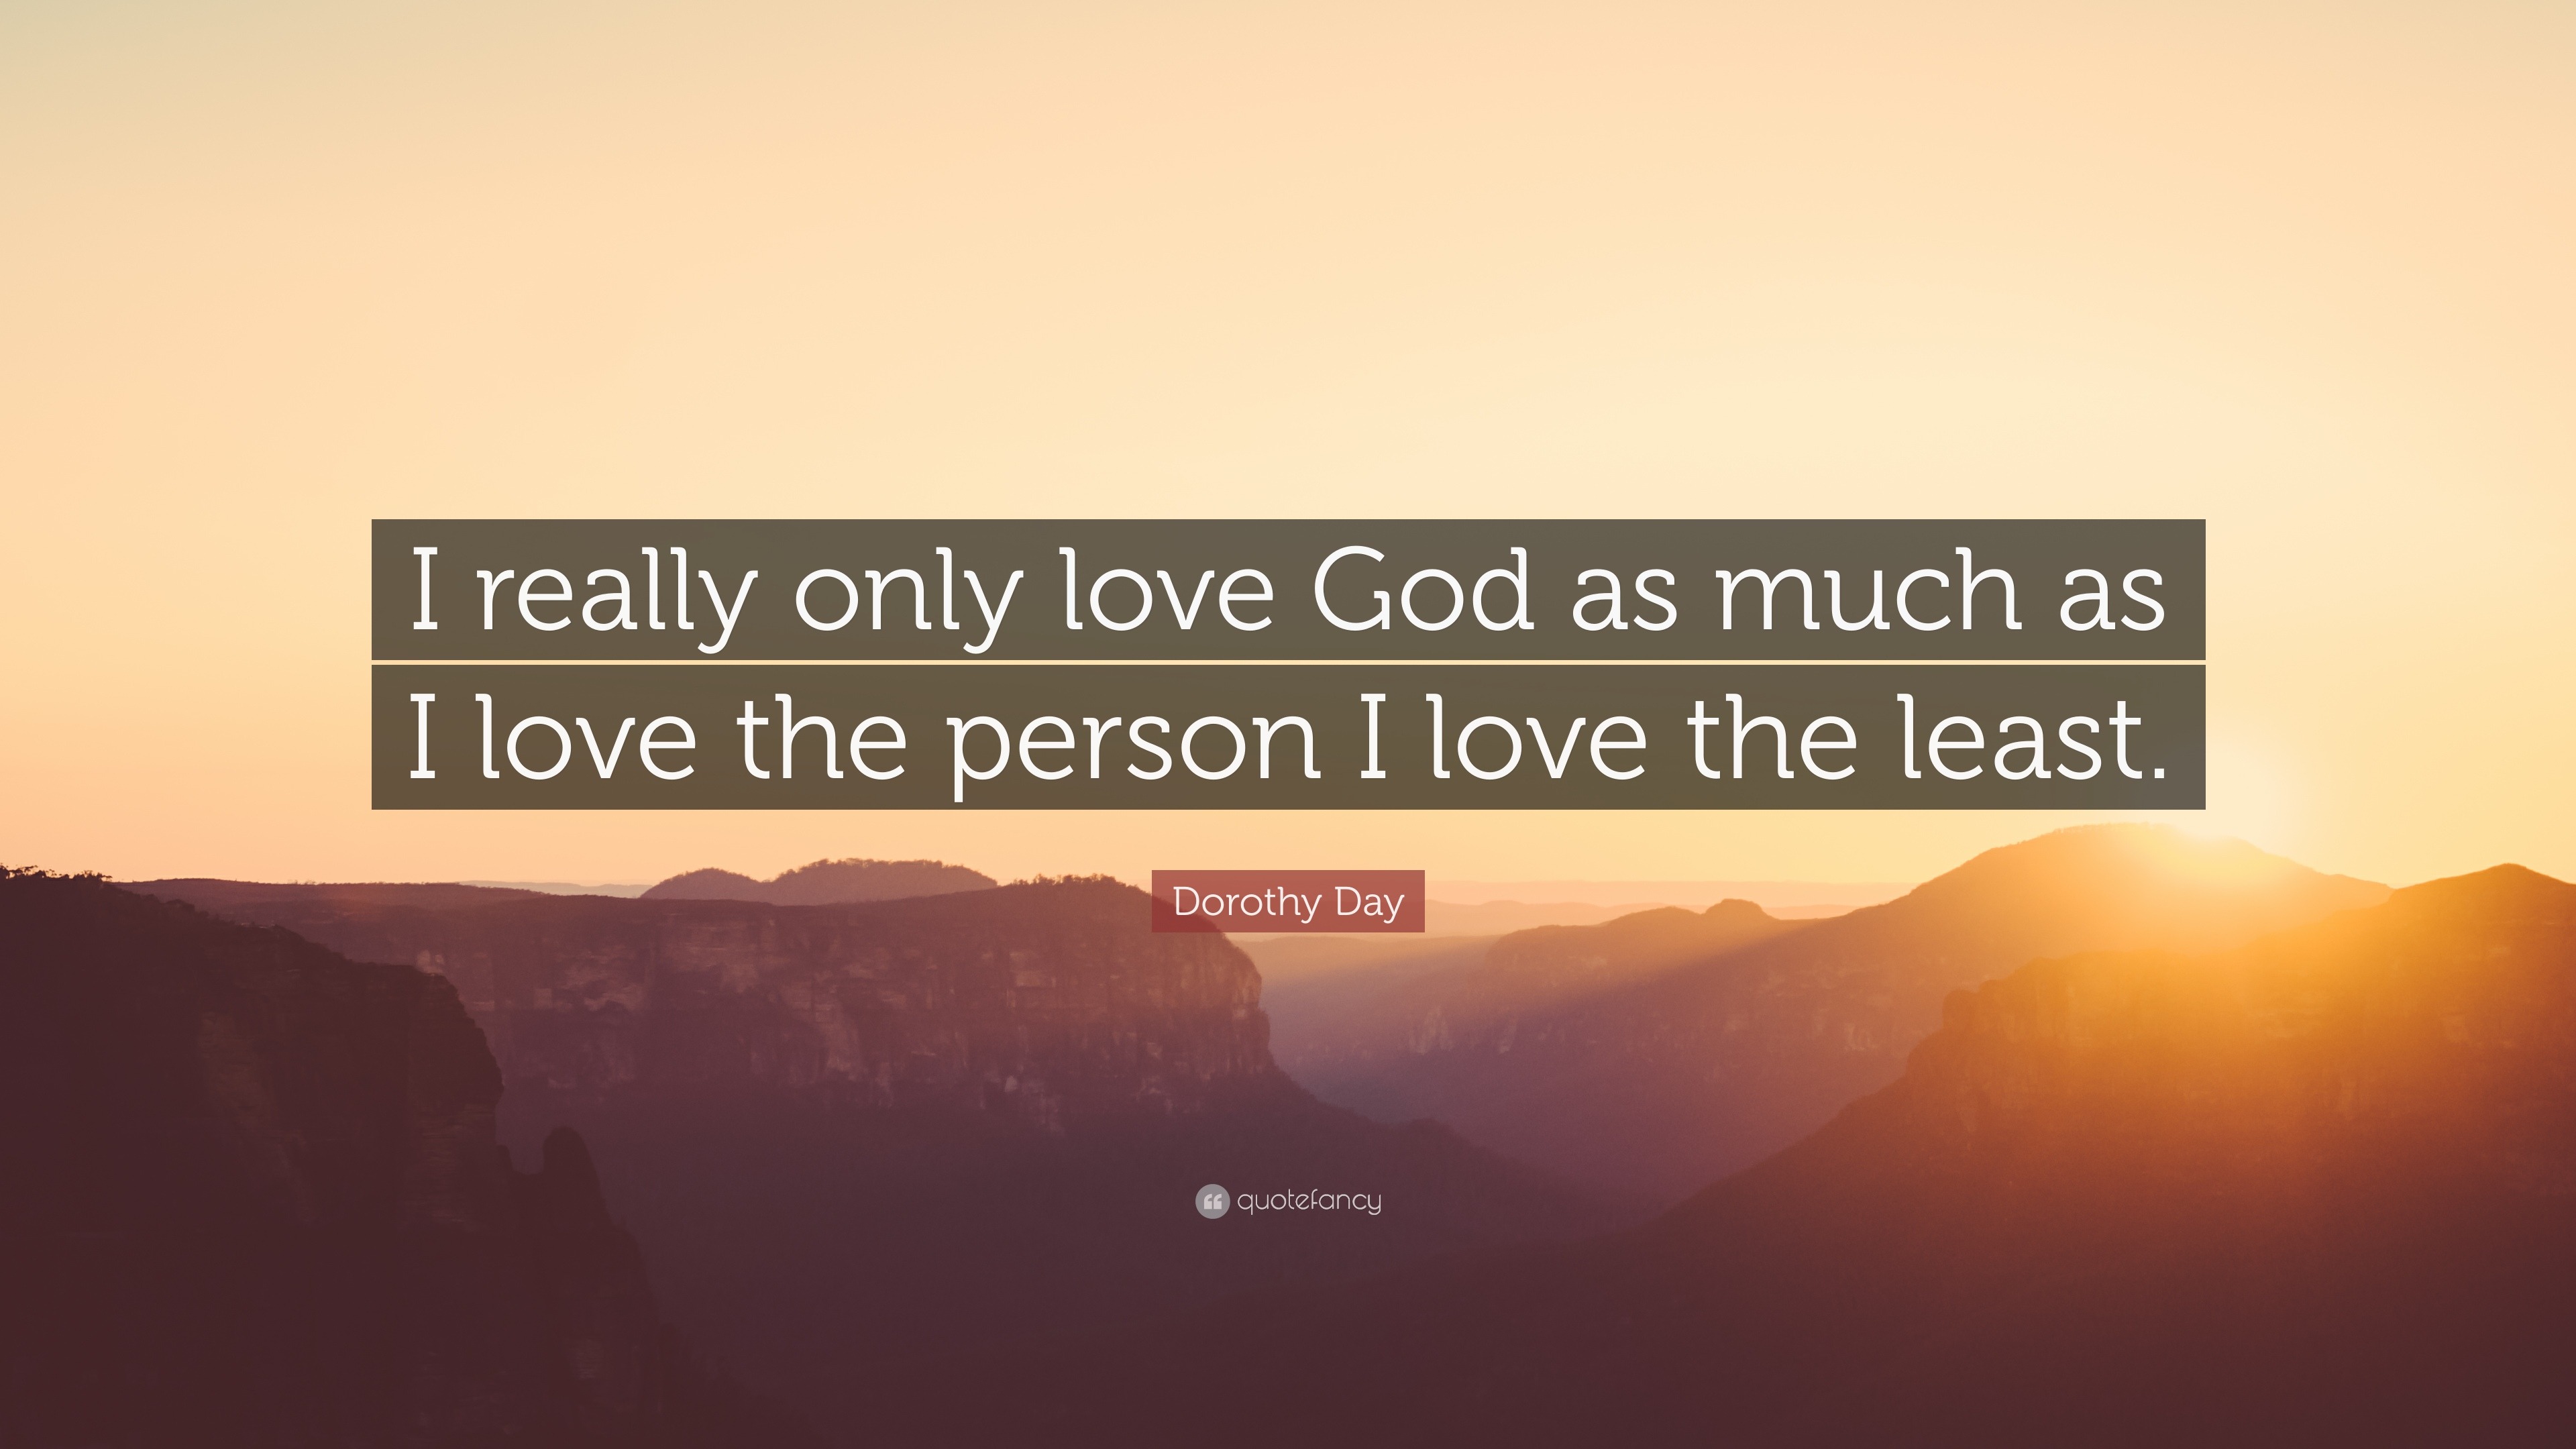 Dorothy Day Quote “I really only love God as much as I love the